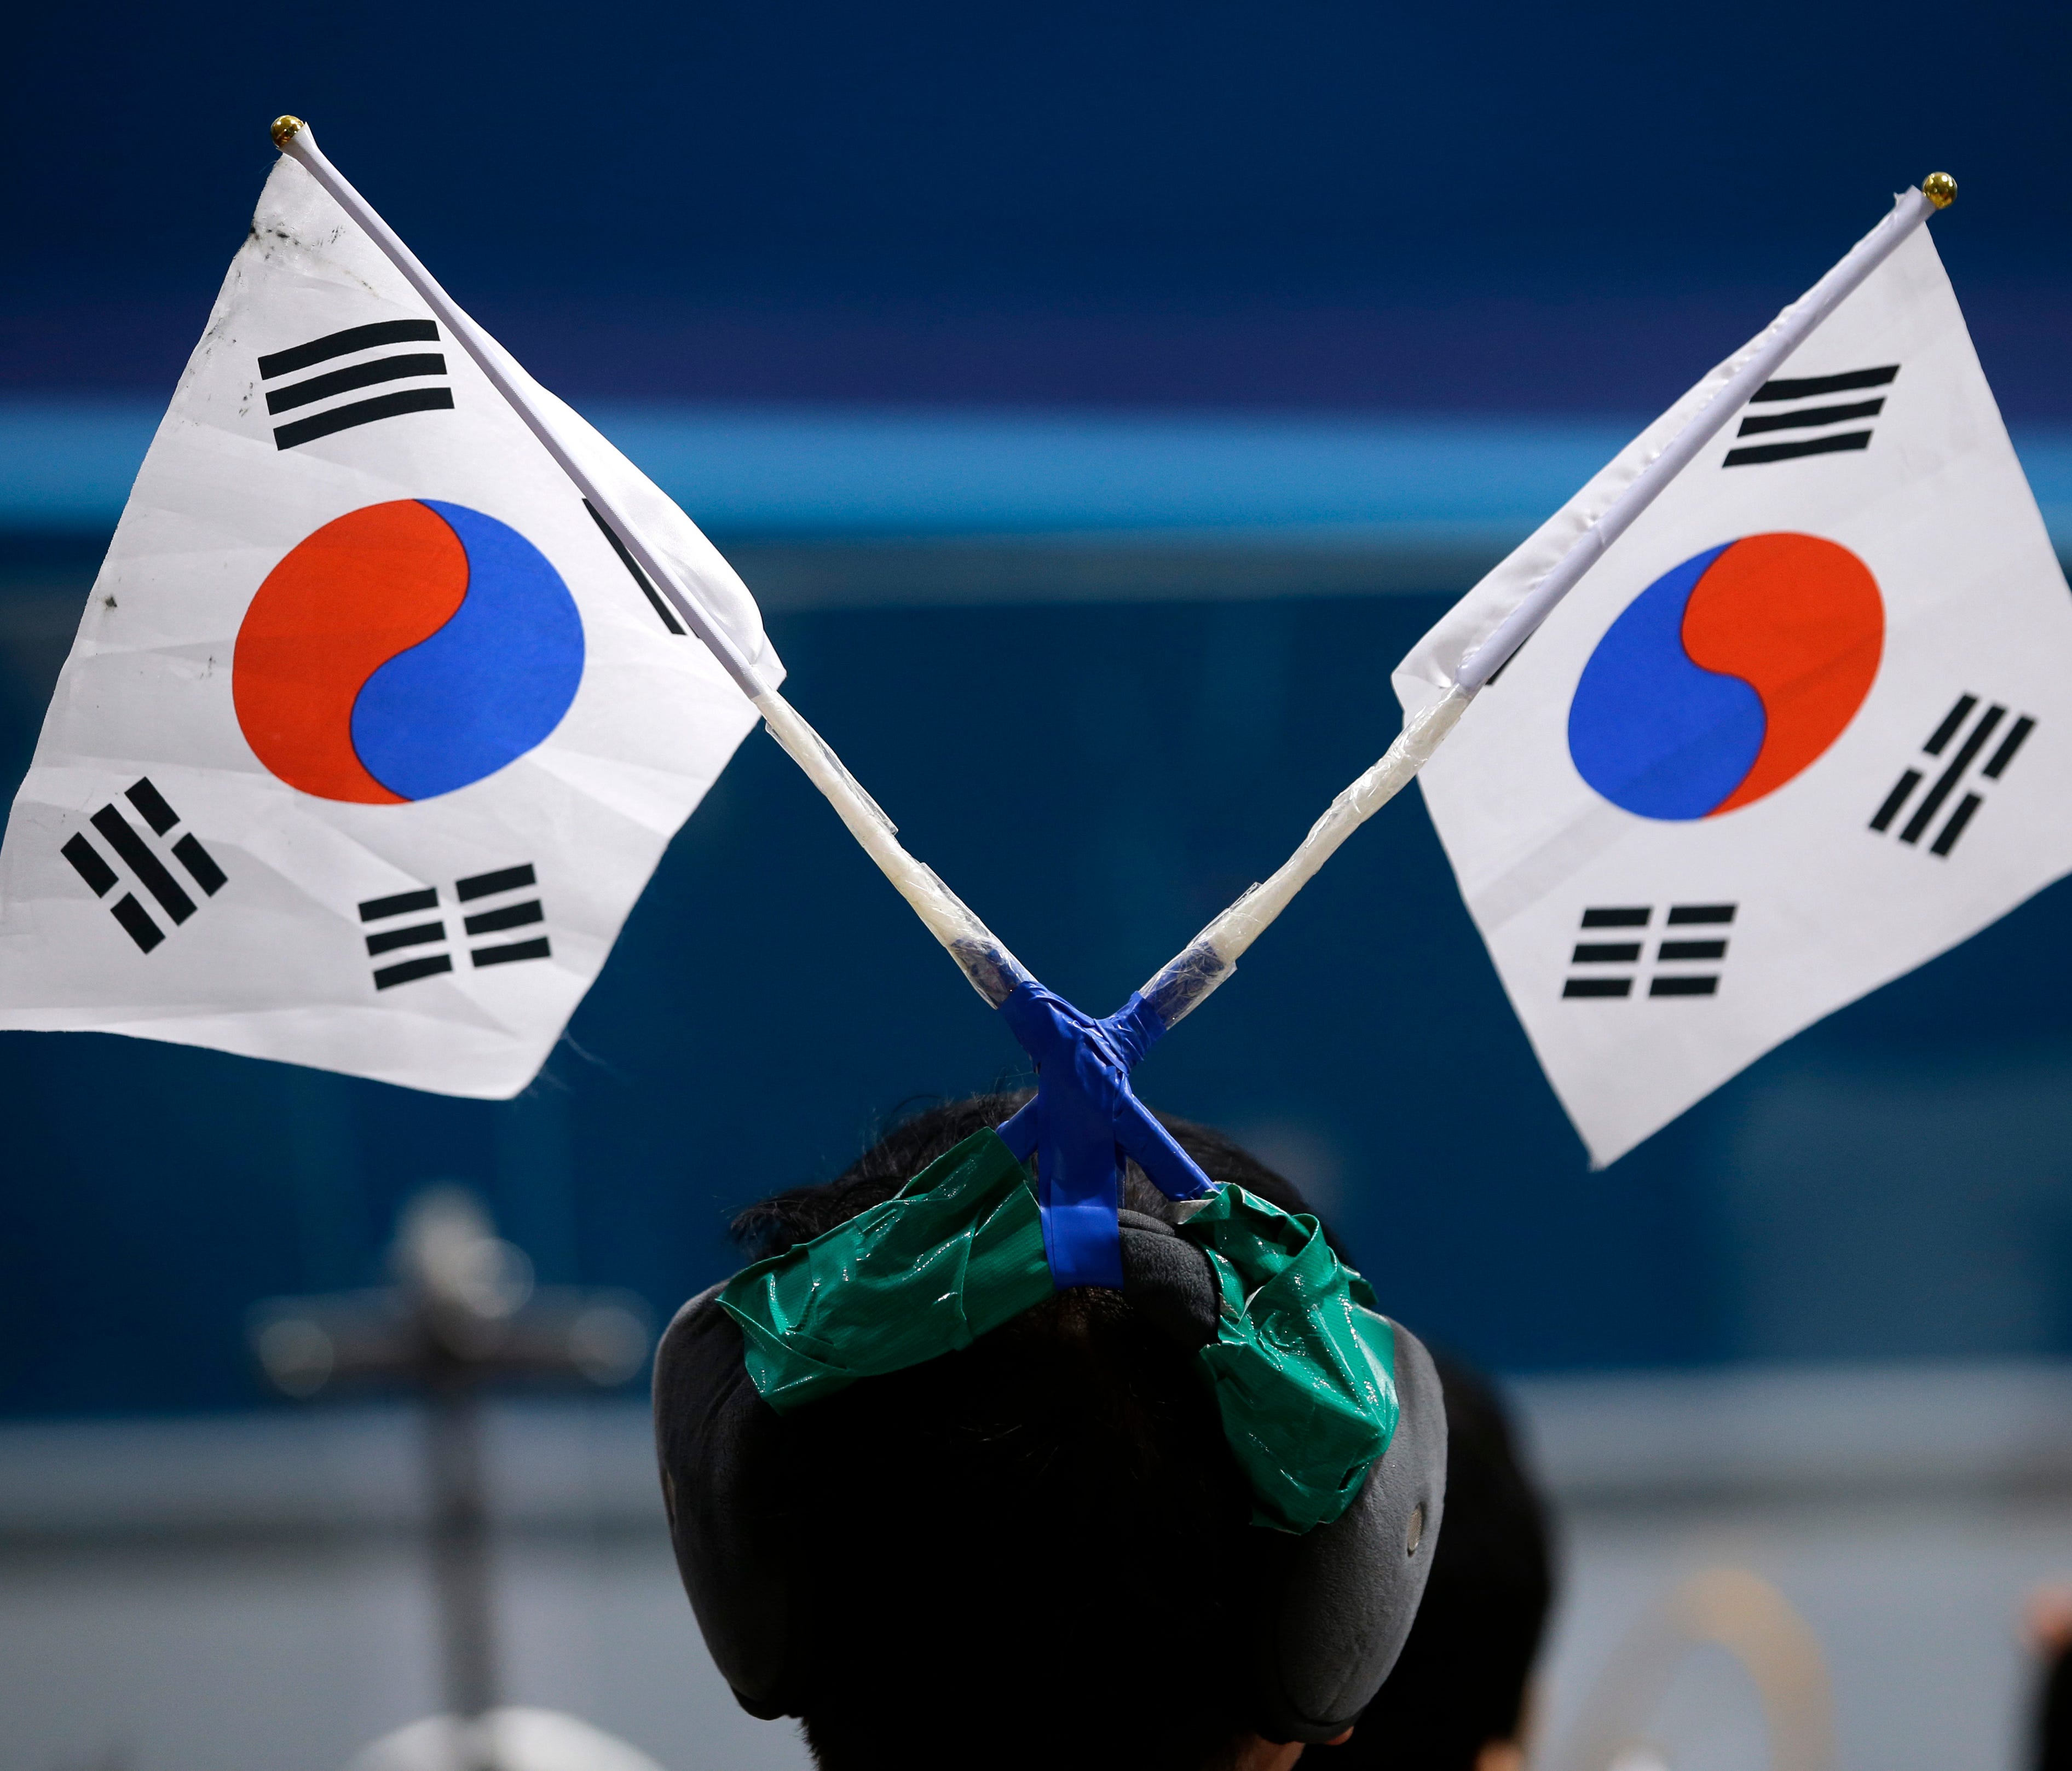 South Korea is hosting the Winter Olympics this year. Here, a spectator straps Korean flags on his headwear as he watches the men's curling matches. The number of South Koreans traveling to the USA has increased significantly.